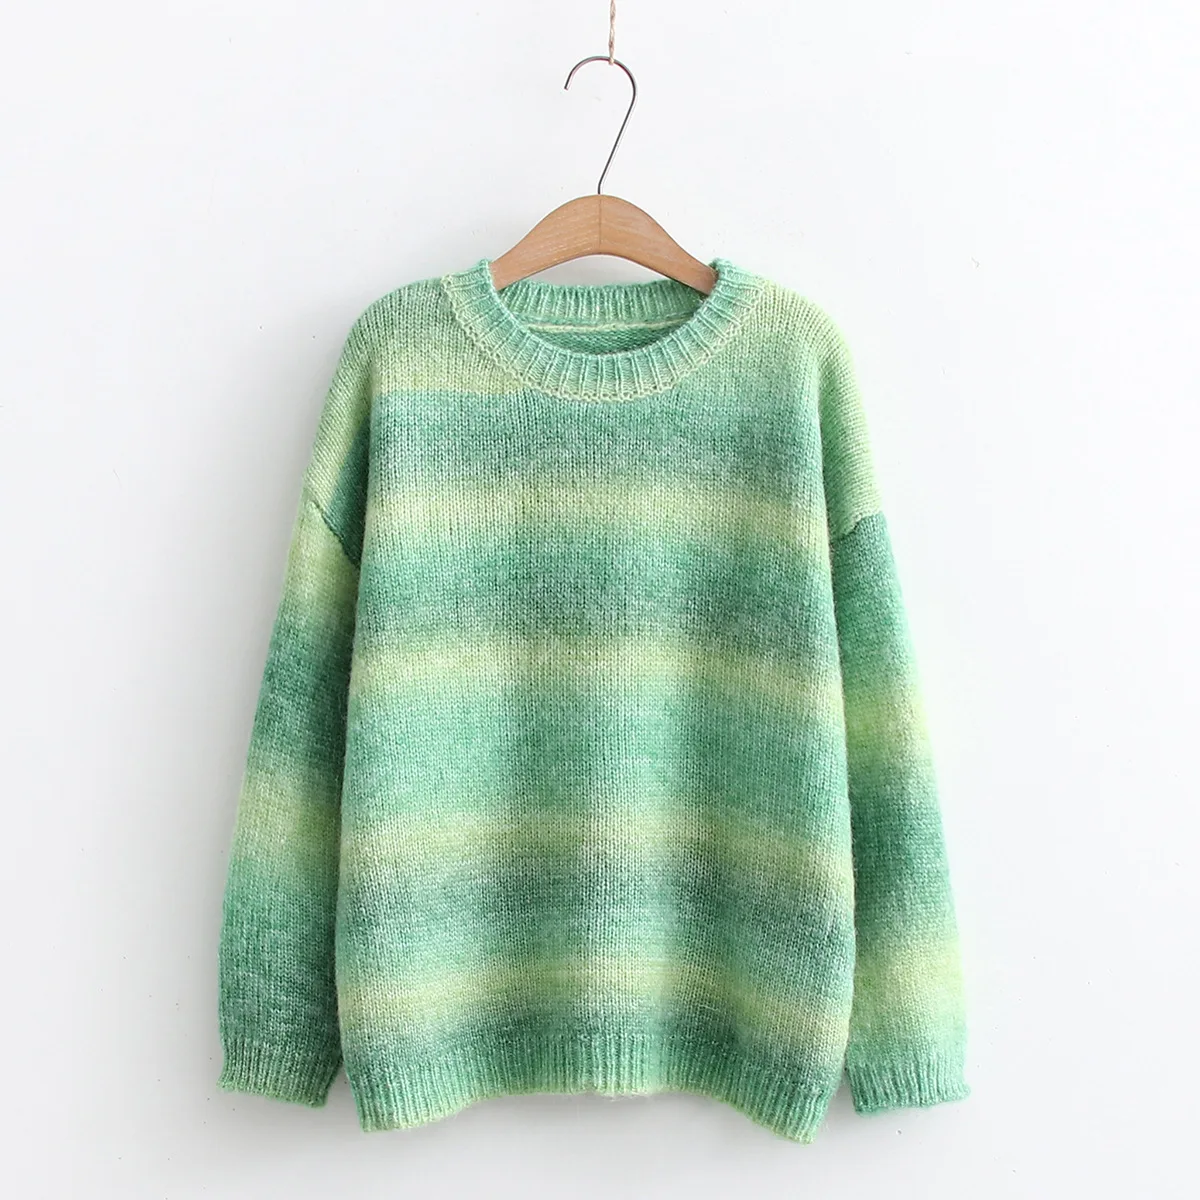 Korean Striped Gradient Casual O Neck Chic Sweater Women Autumn Winter Fashion Drop Shoulder Knitwear Loose Pullover for Female